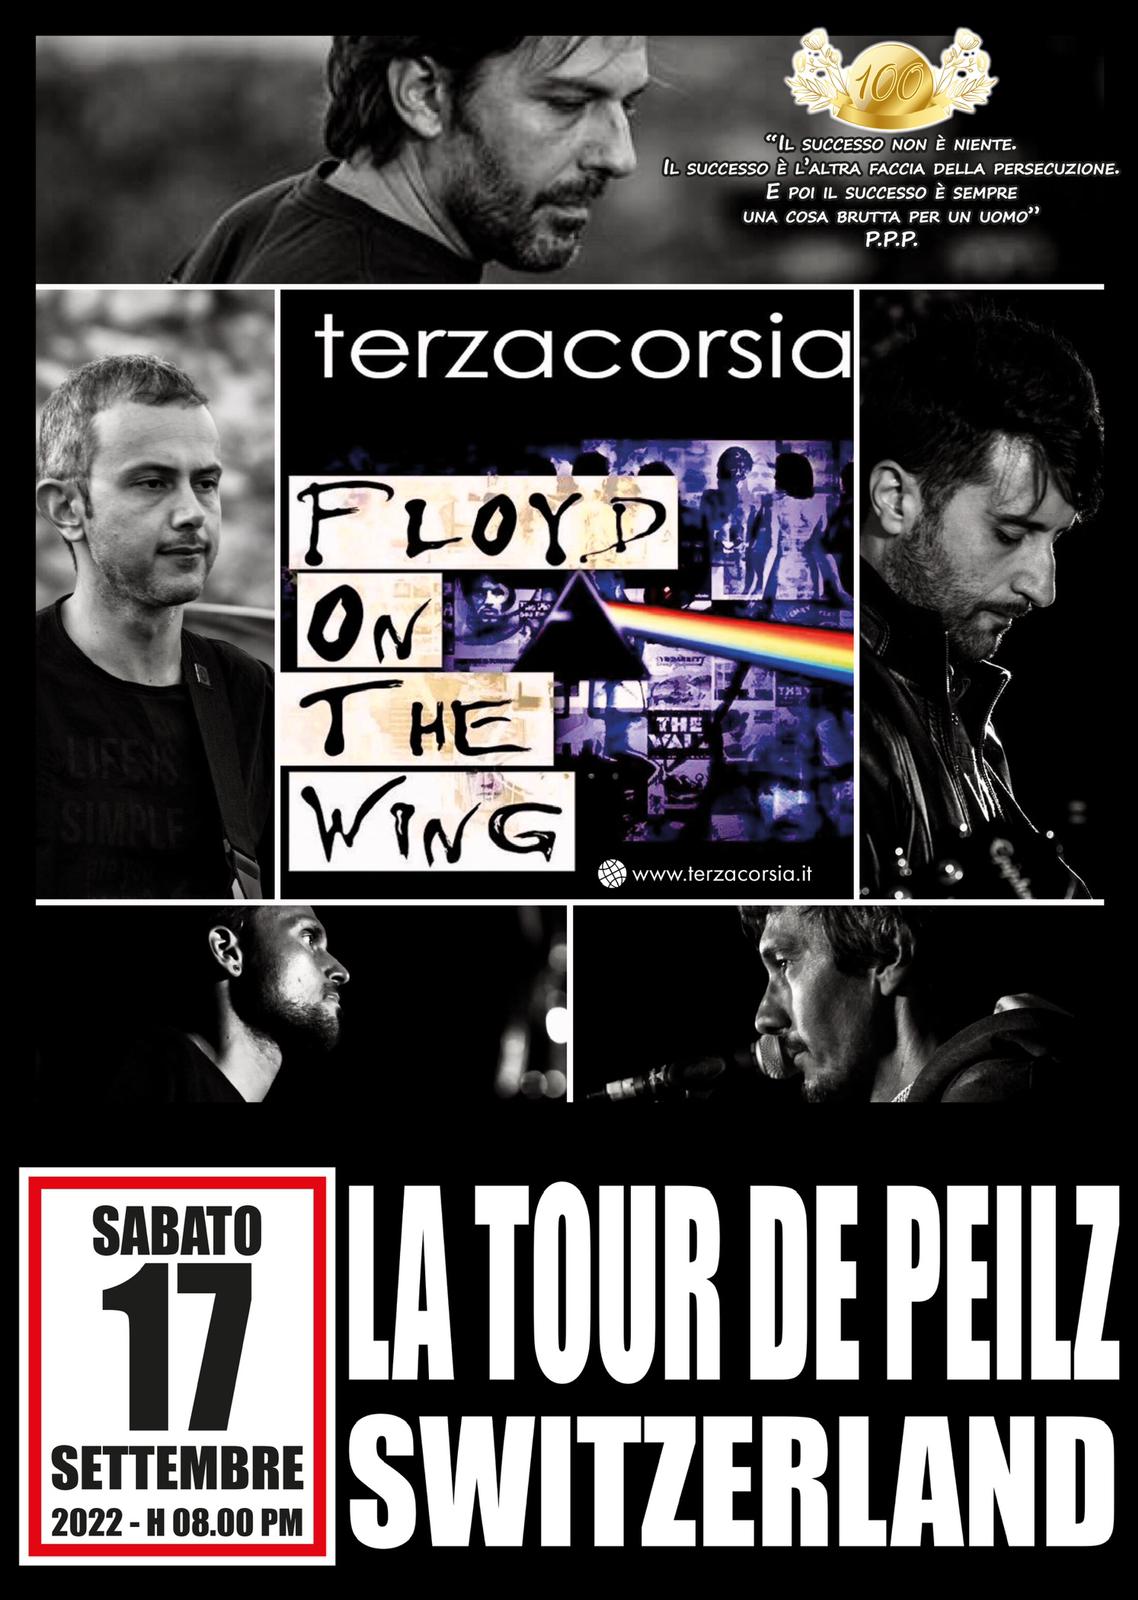 floyd on the wing cover pink floyd abruzzo pescara chieti